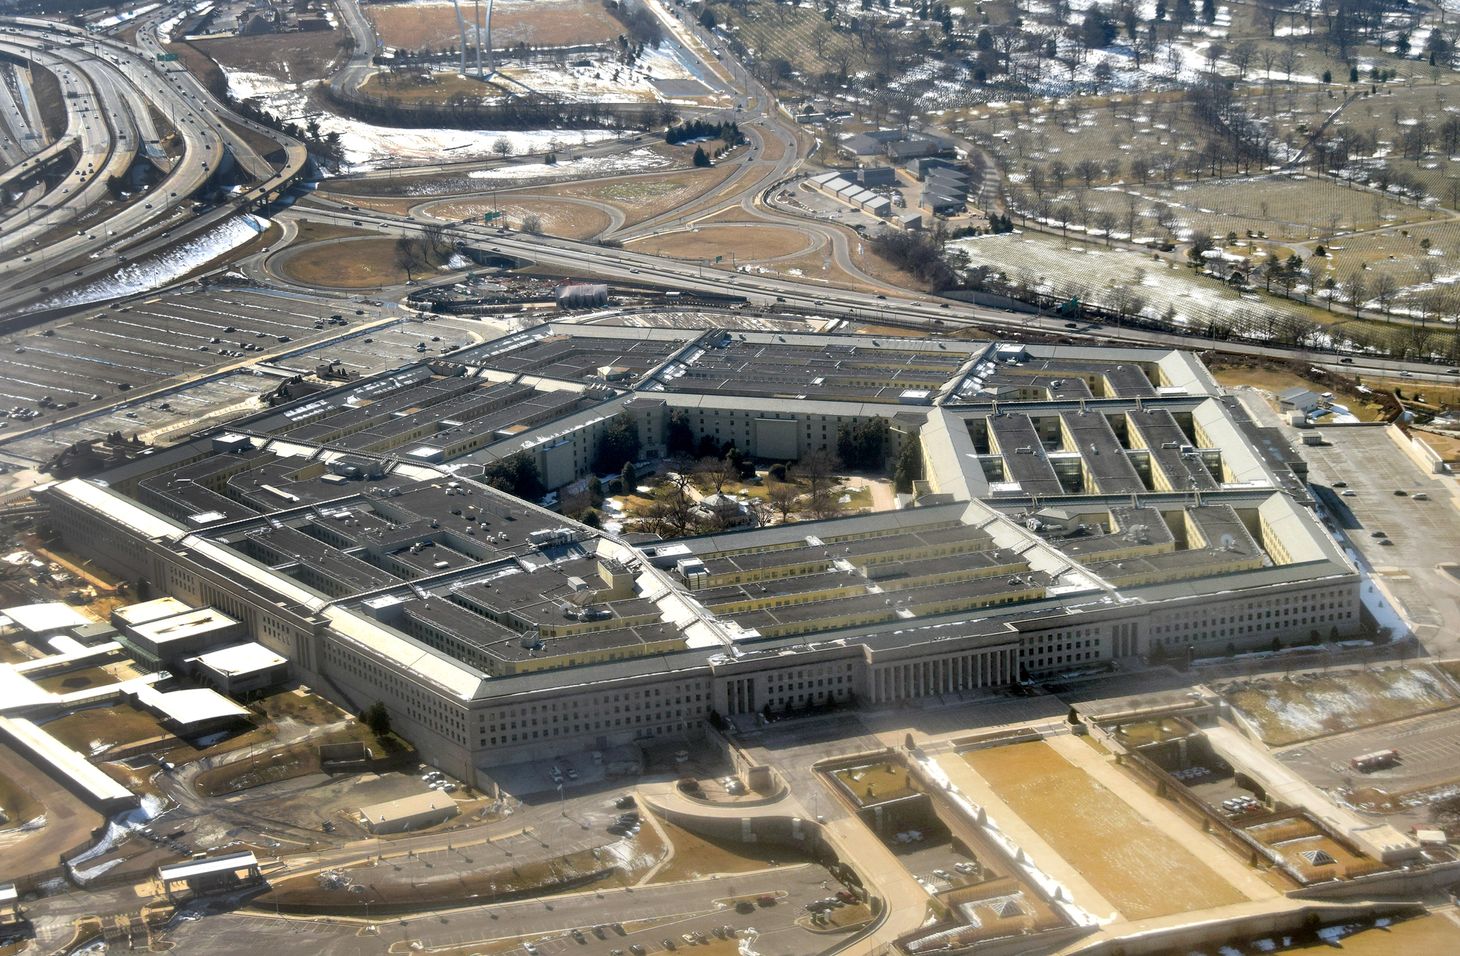 Pentagon innovations and DOD innovations are important